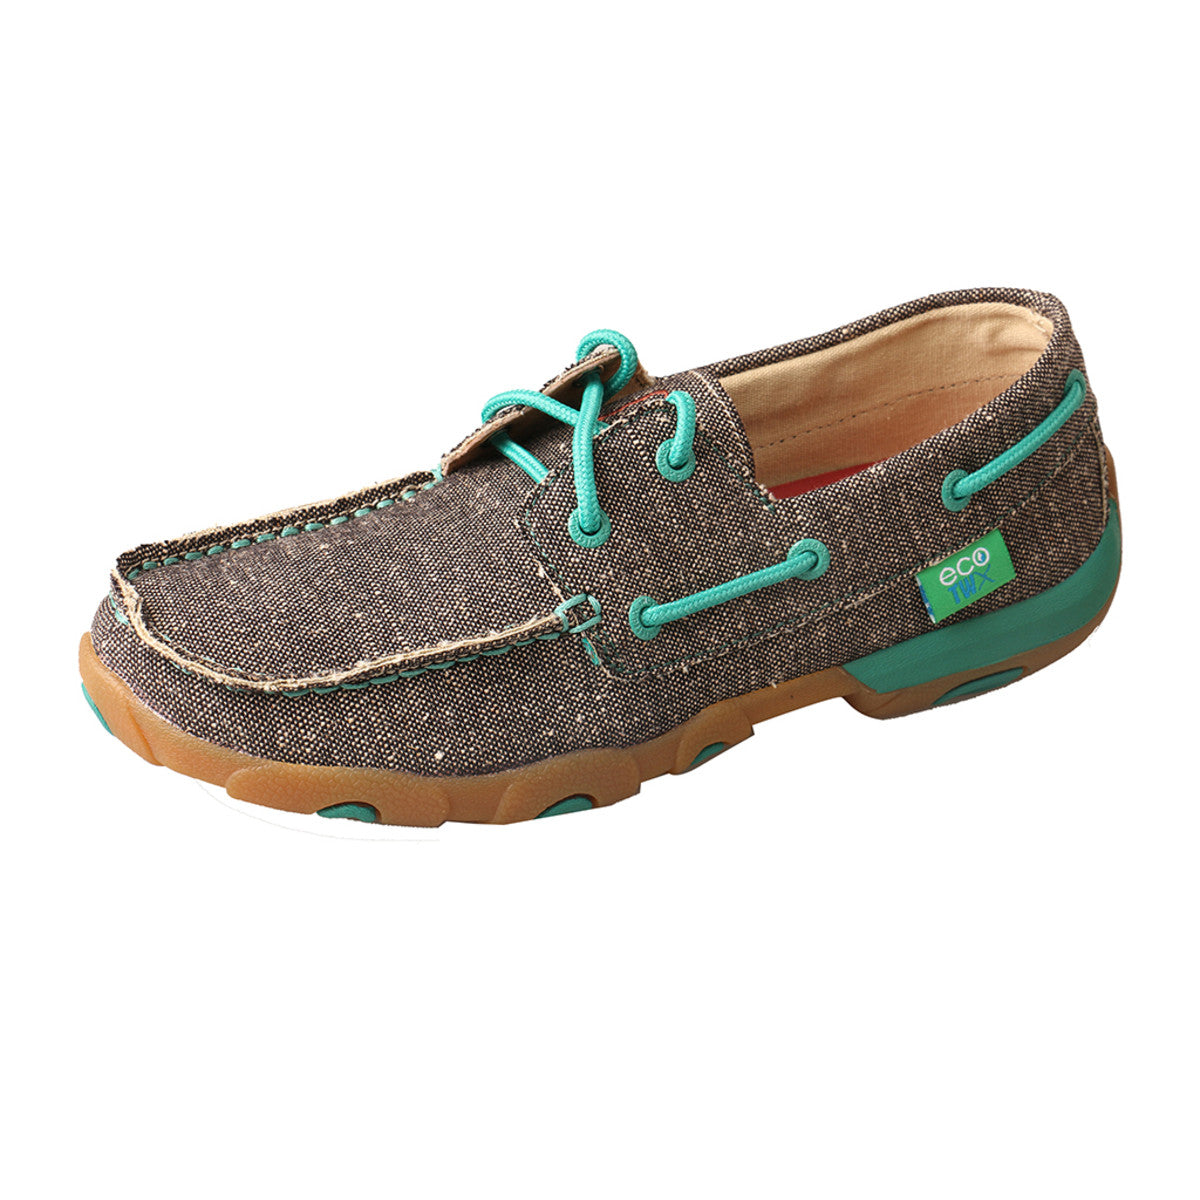 Women's Twisted X Boat Shoe Driving Moccasins in Dust from the side view